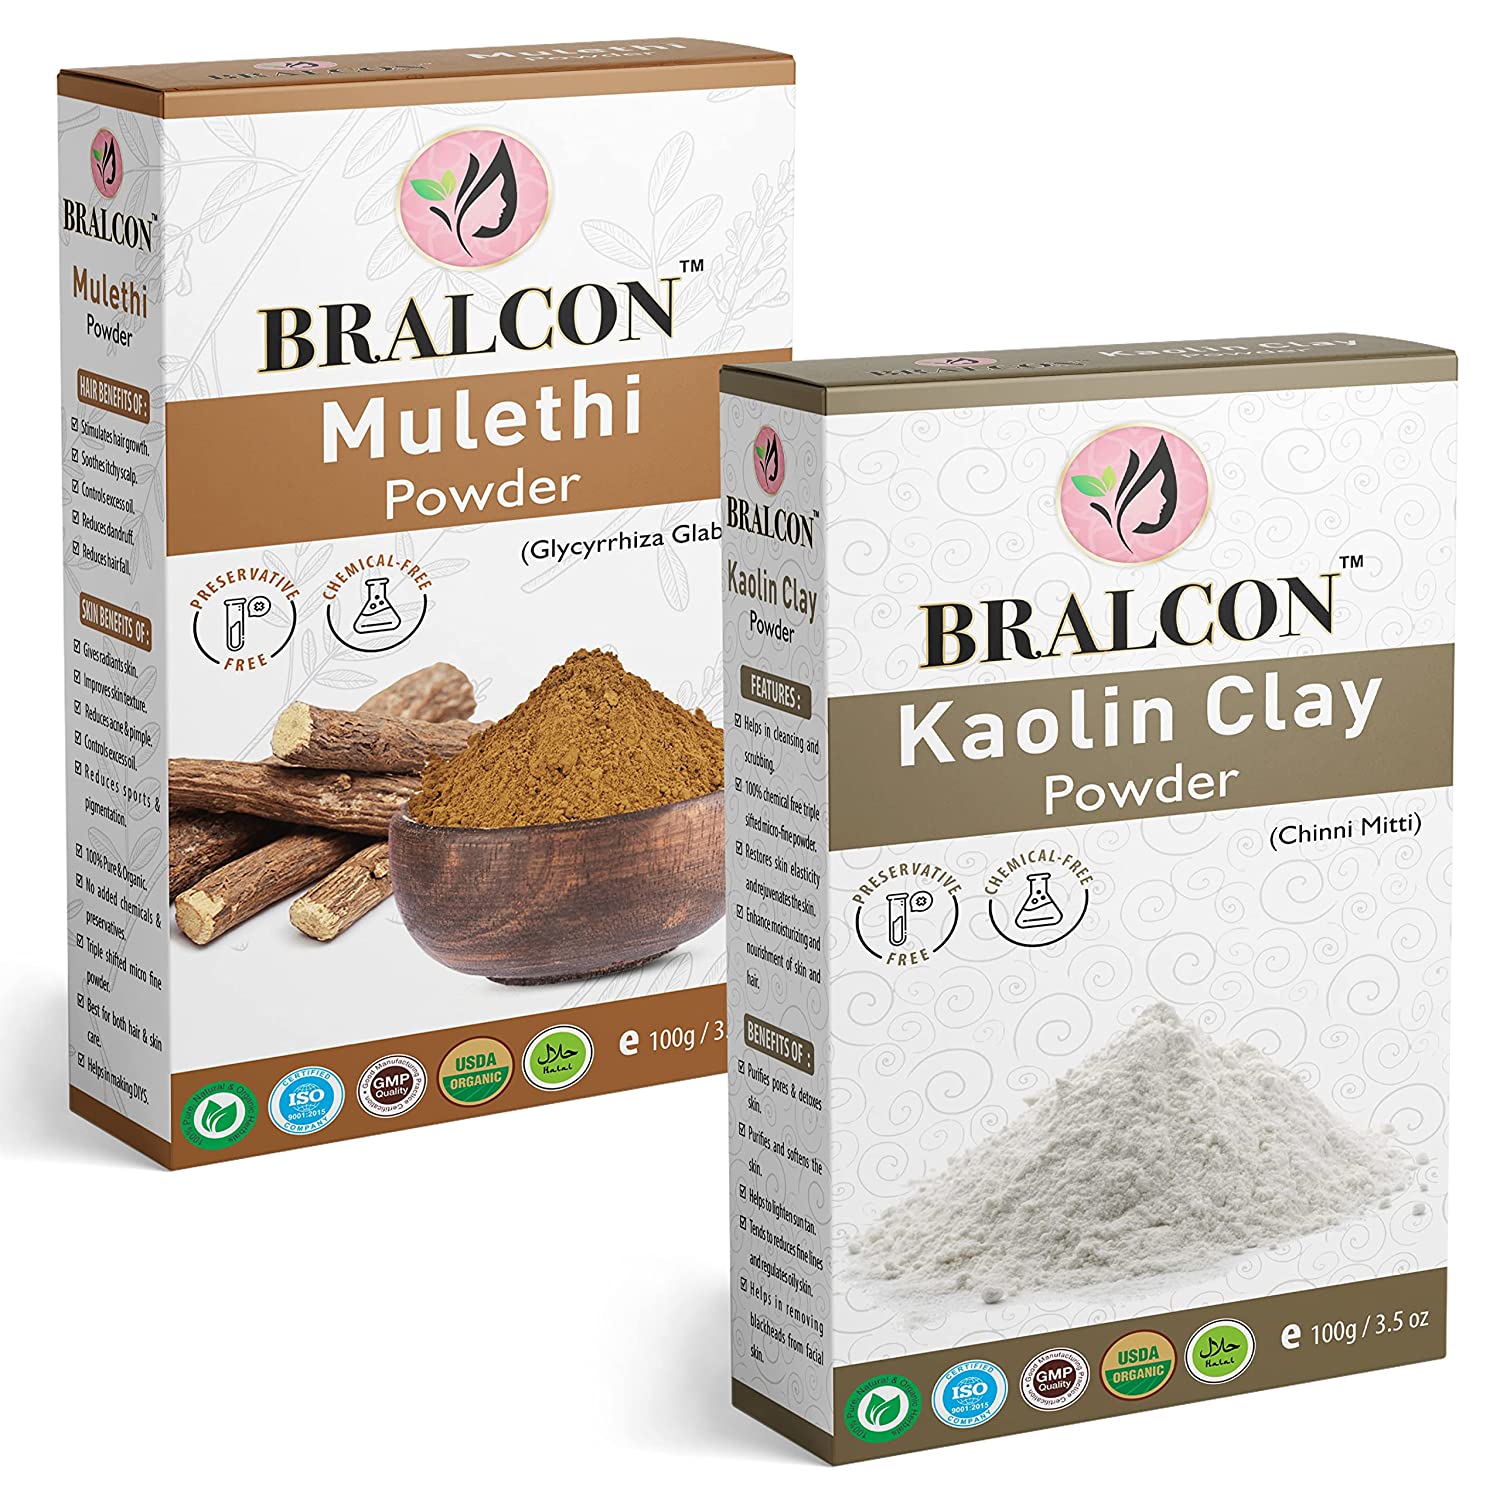 BRALCON Organic Mulethi Powder, Kaolin Clay Powder Combo -200g(100g x 2  Pack) - Online Quality Store Official Website